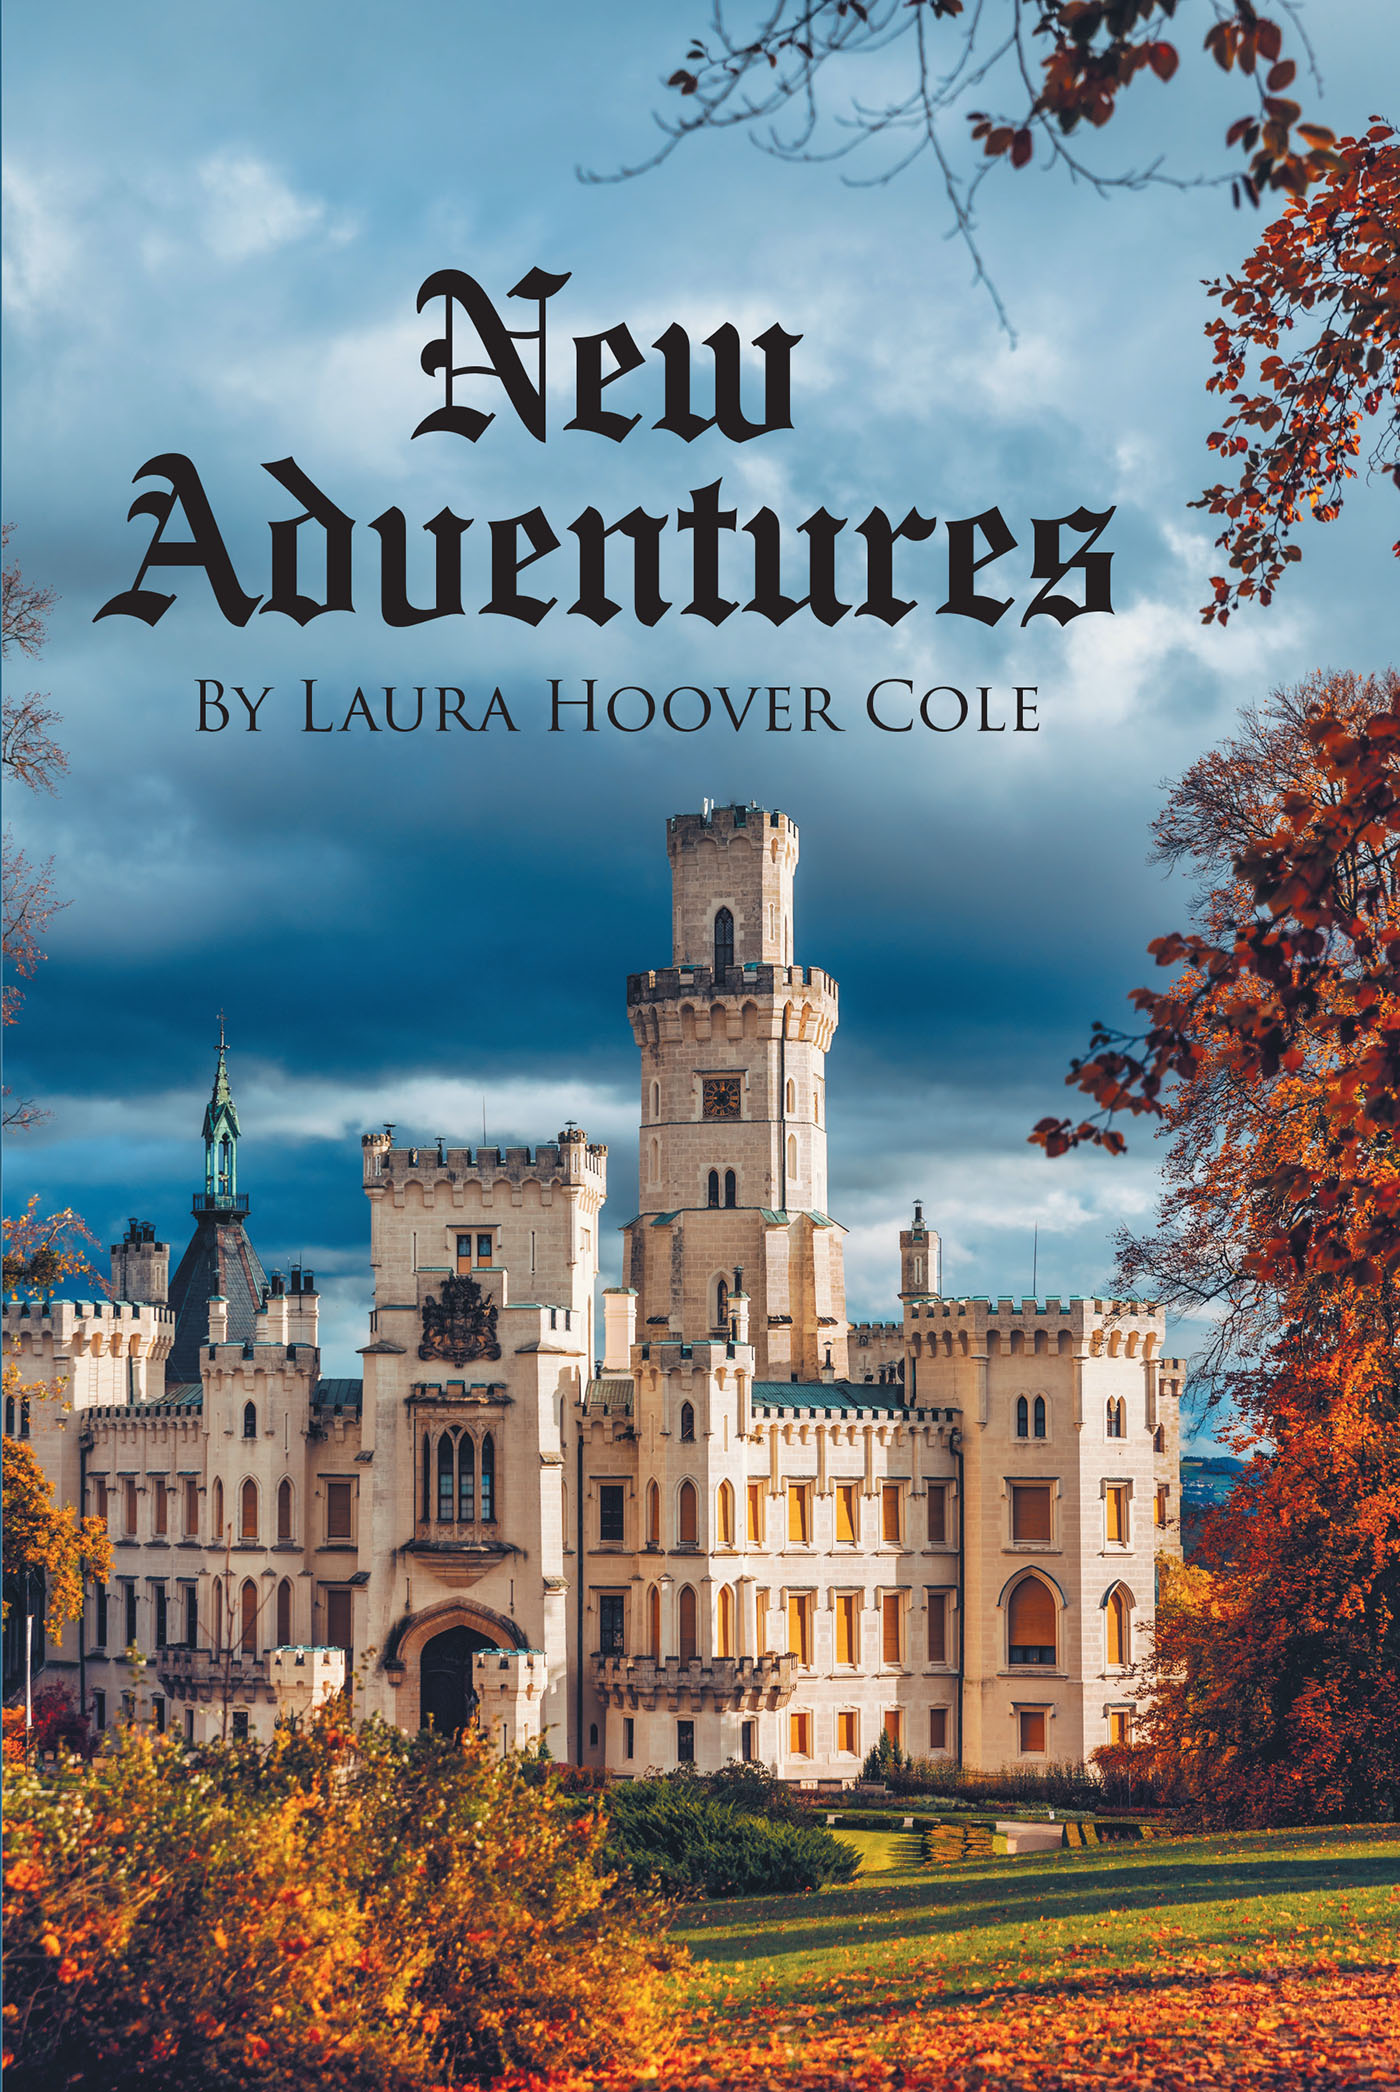 Author Laura Hoover Cole’s New Book, "New Adventures," Follows One Family as Life's Challenges Present Them with the Opportunity to Become Closer and Grow Their Love